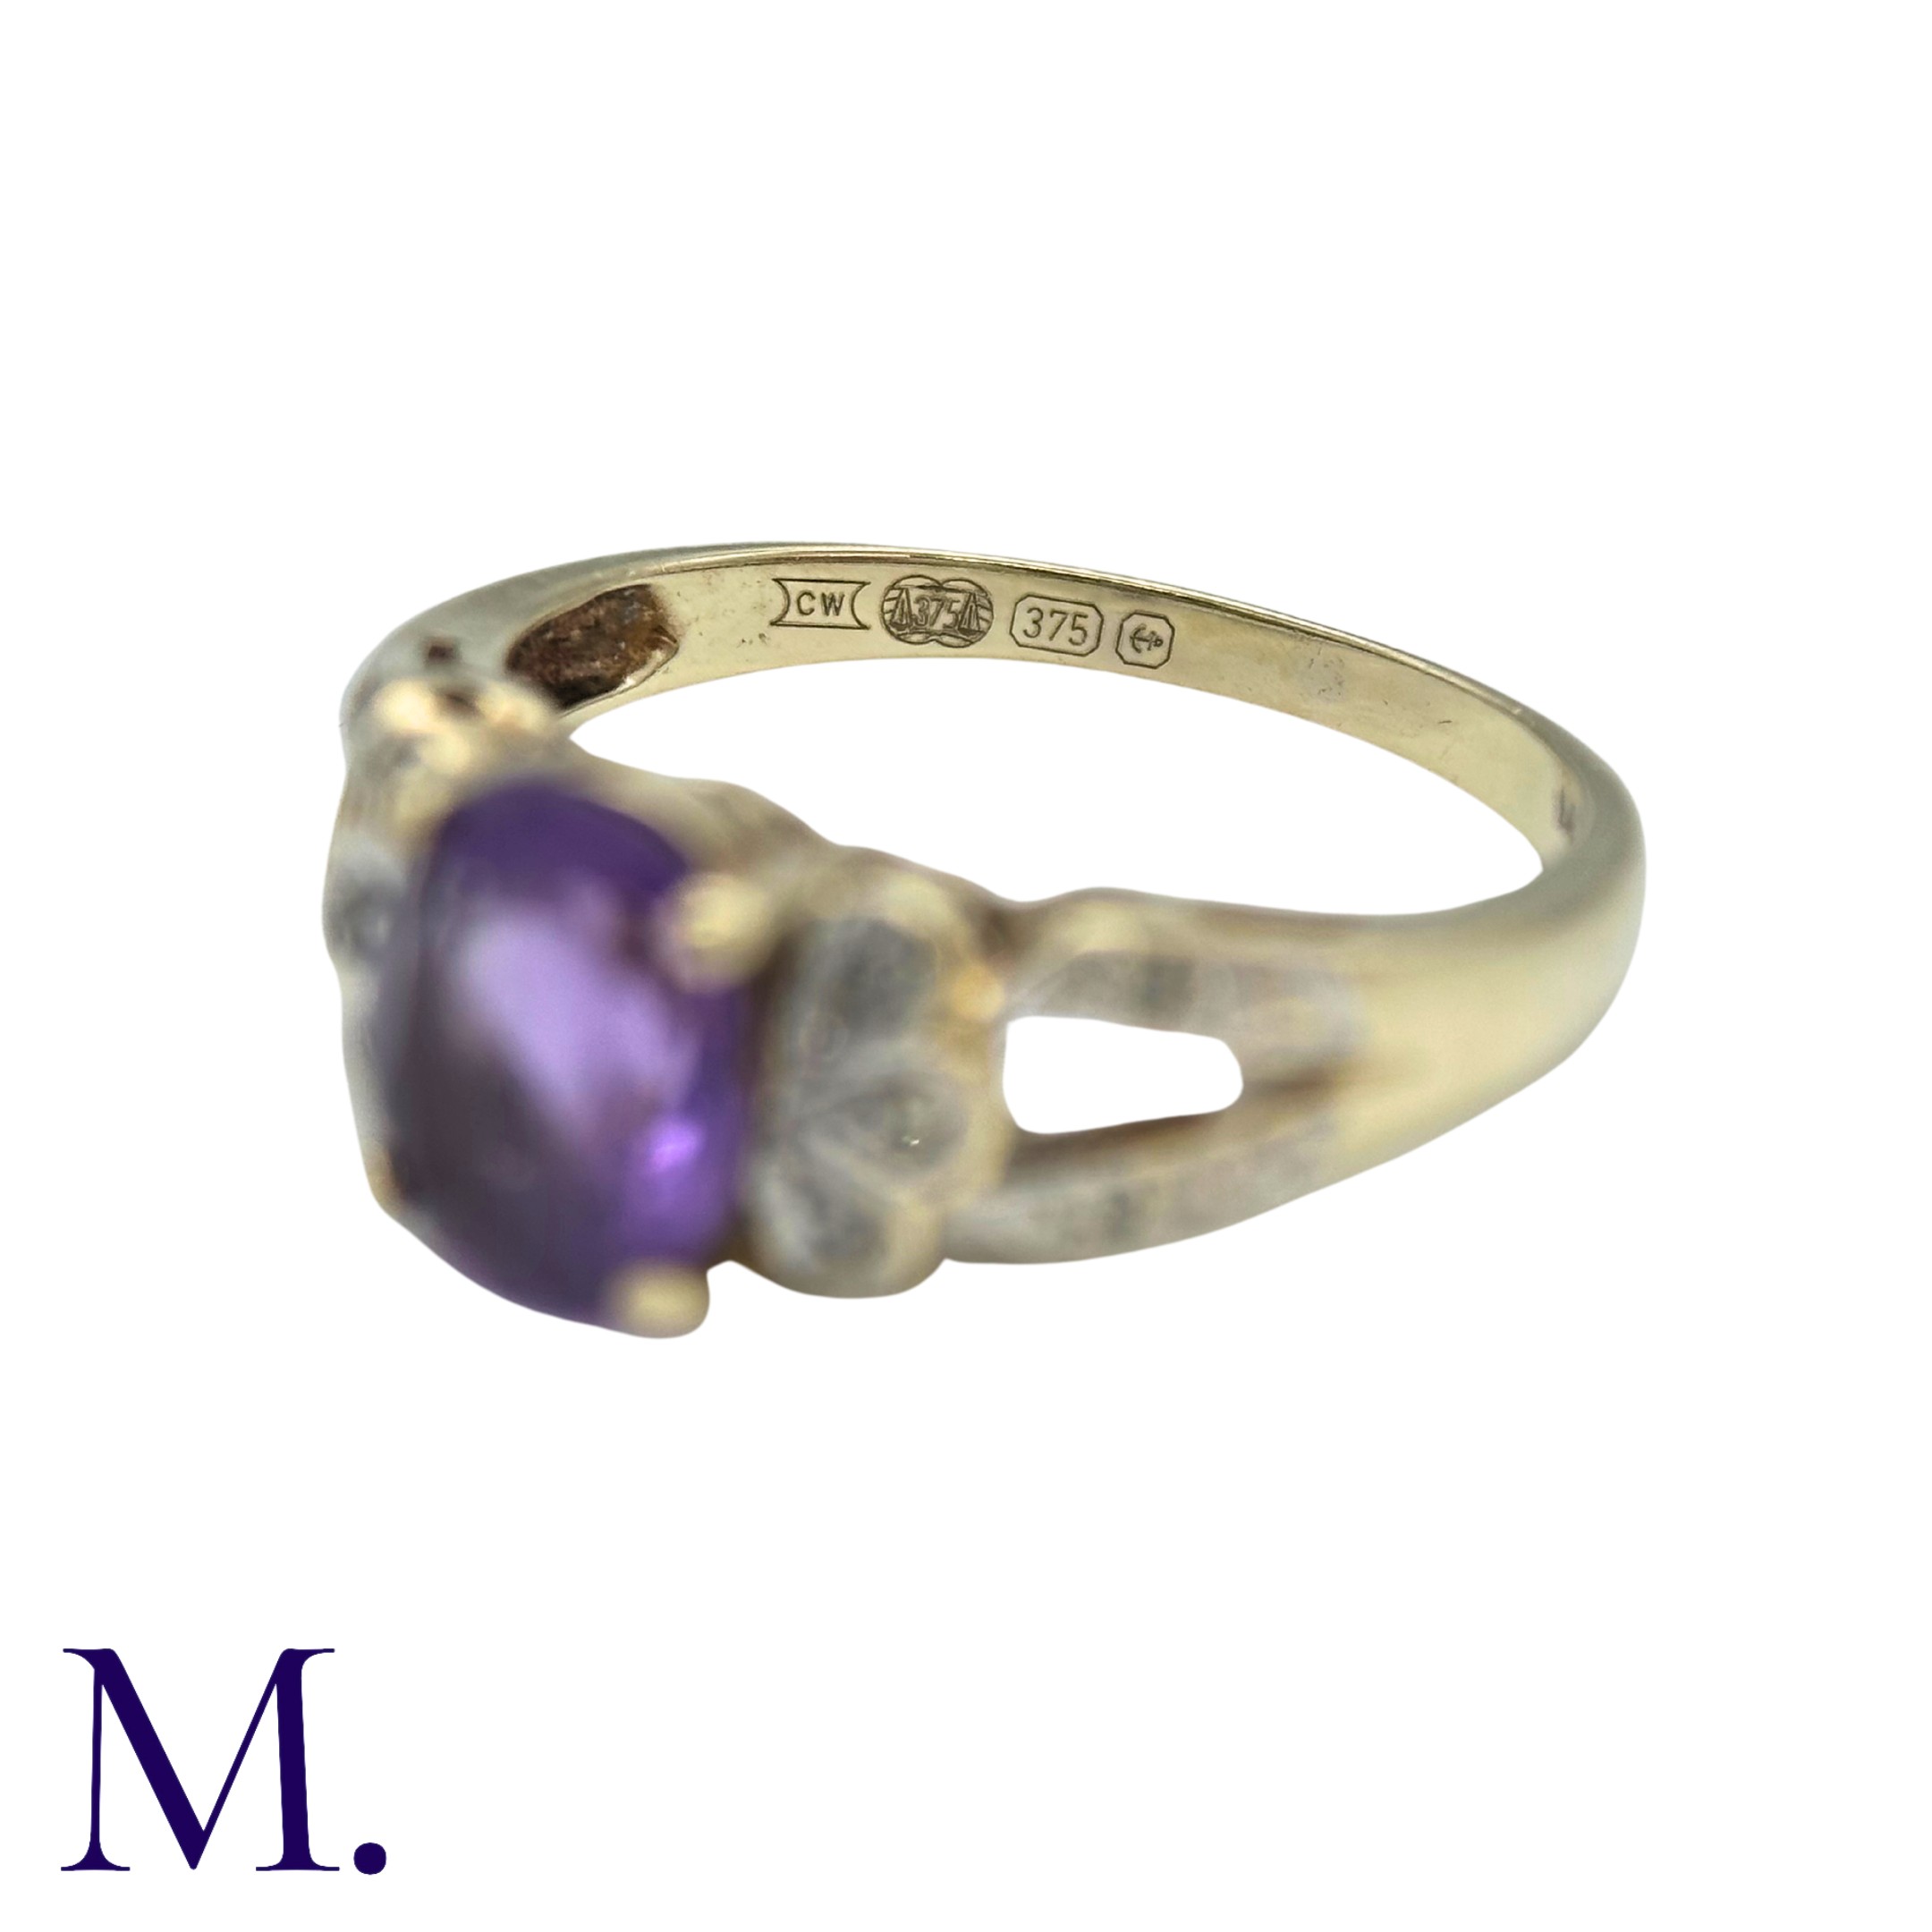 An Amethyst And Diamond Ring in 9k yellow gold, set with a central oval cut amethyst, accented by - Image 4 of 4